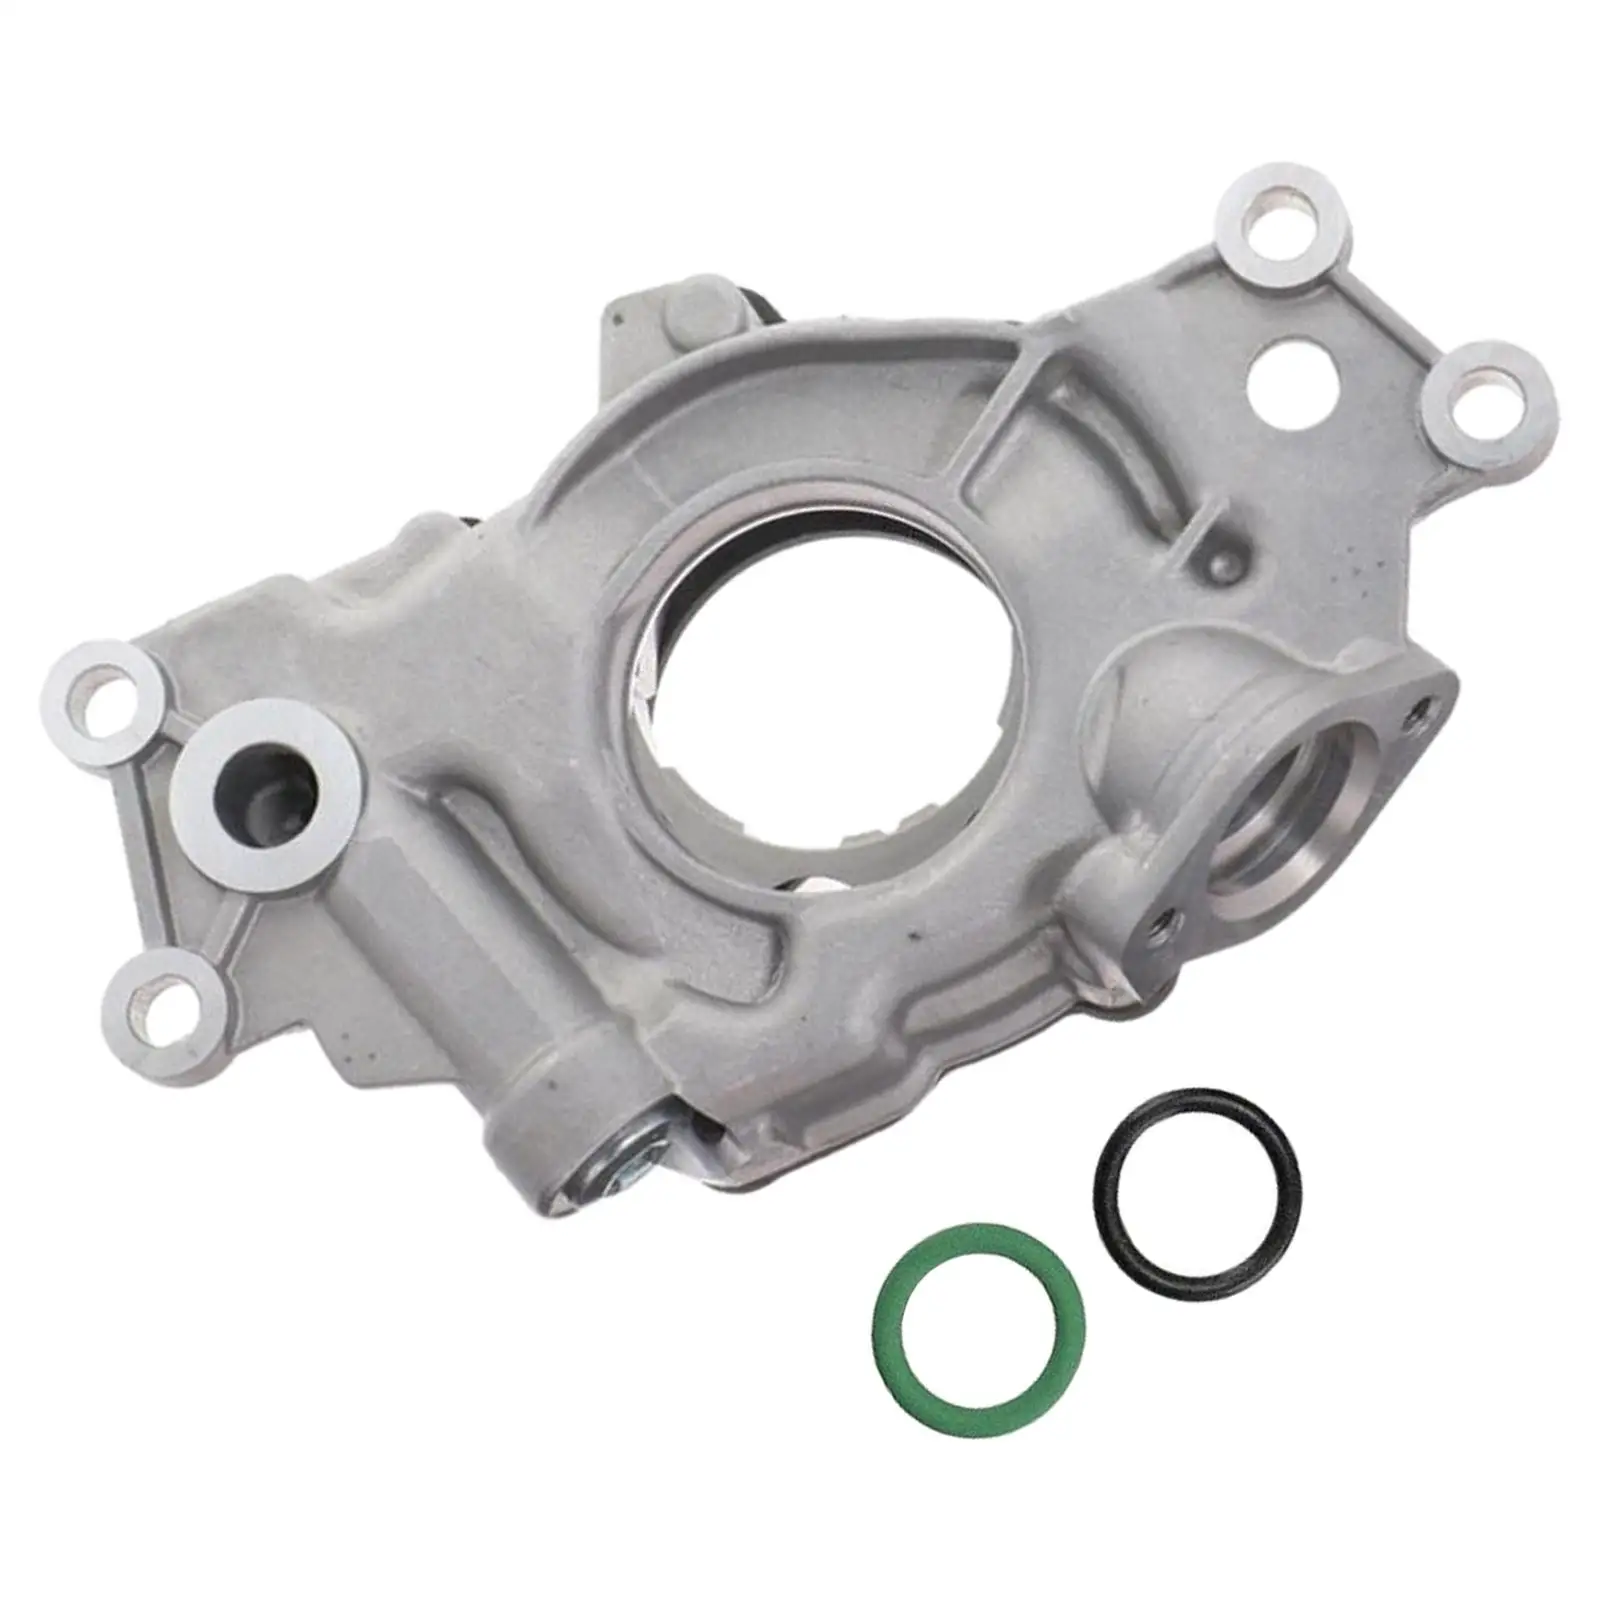 Oil Pump Alloy Replacement Easy to Install Professional High Performance High Volume Oil Pumps for LC9 L99 L92 L9H L76